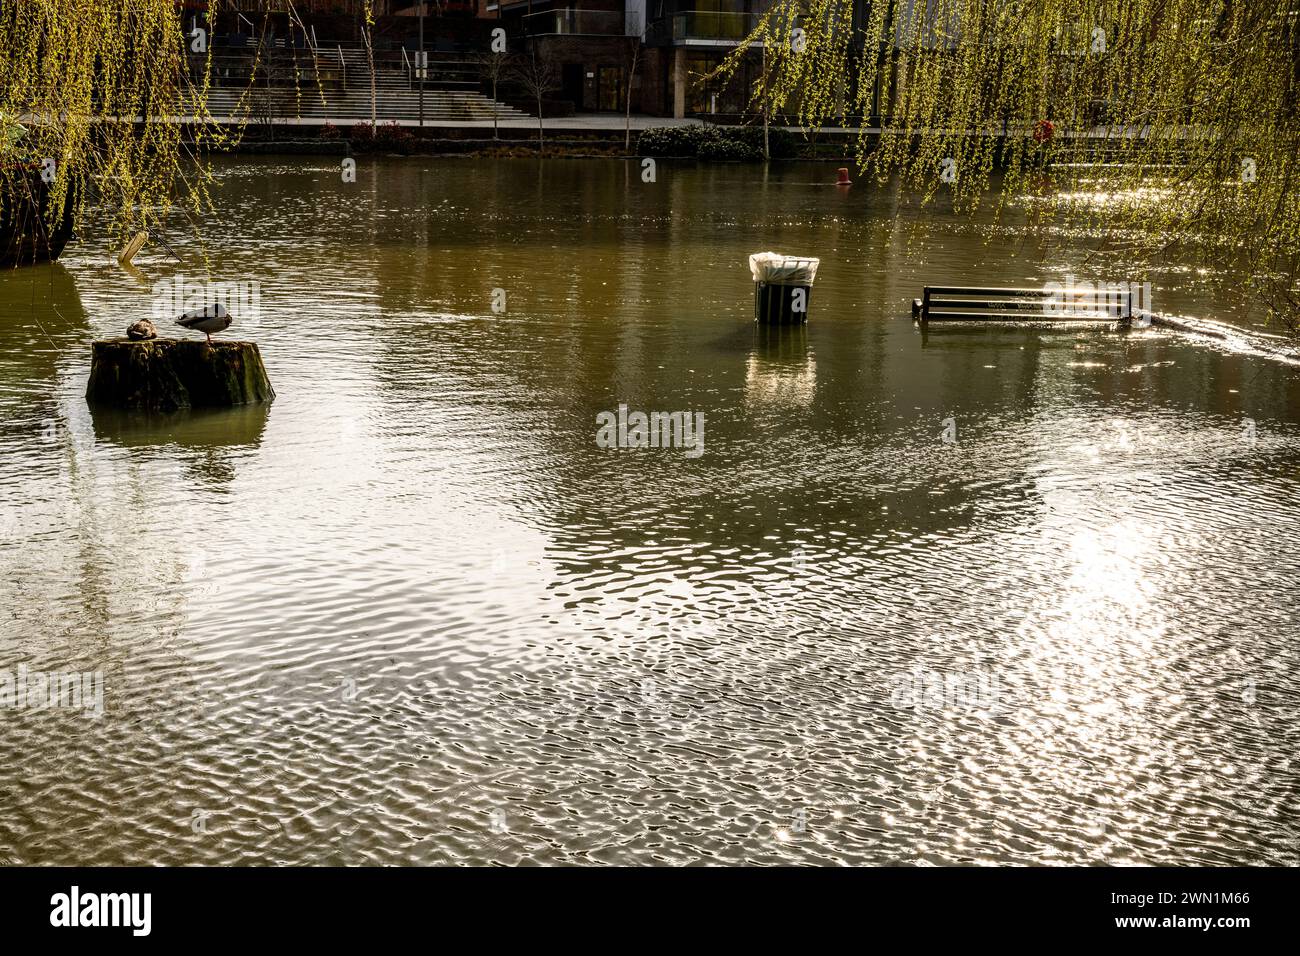 The RIver Nene in flood in central Peterborough, Cambridgeshire, February 2024. The level of flooding in 2024 seems to be higher than previous years. Stock Photo